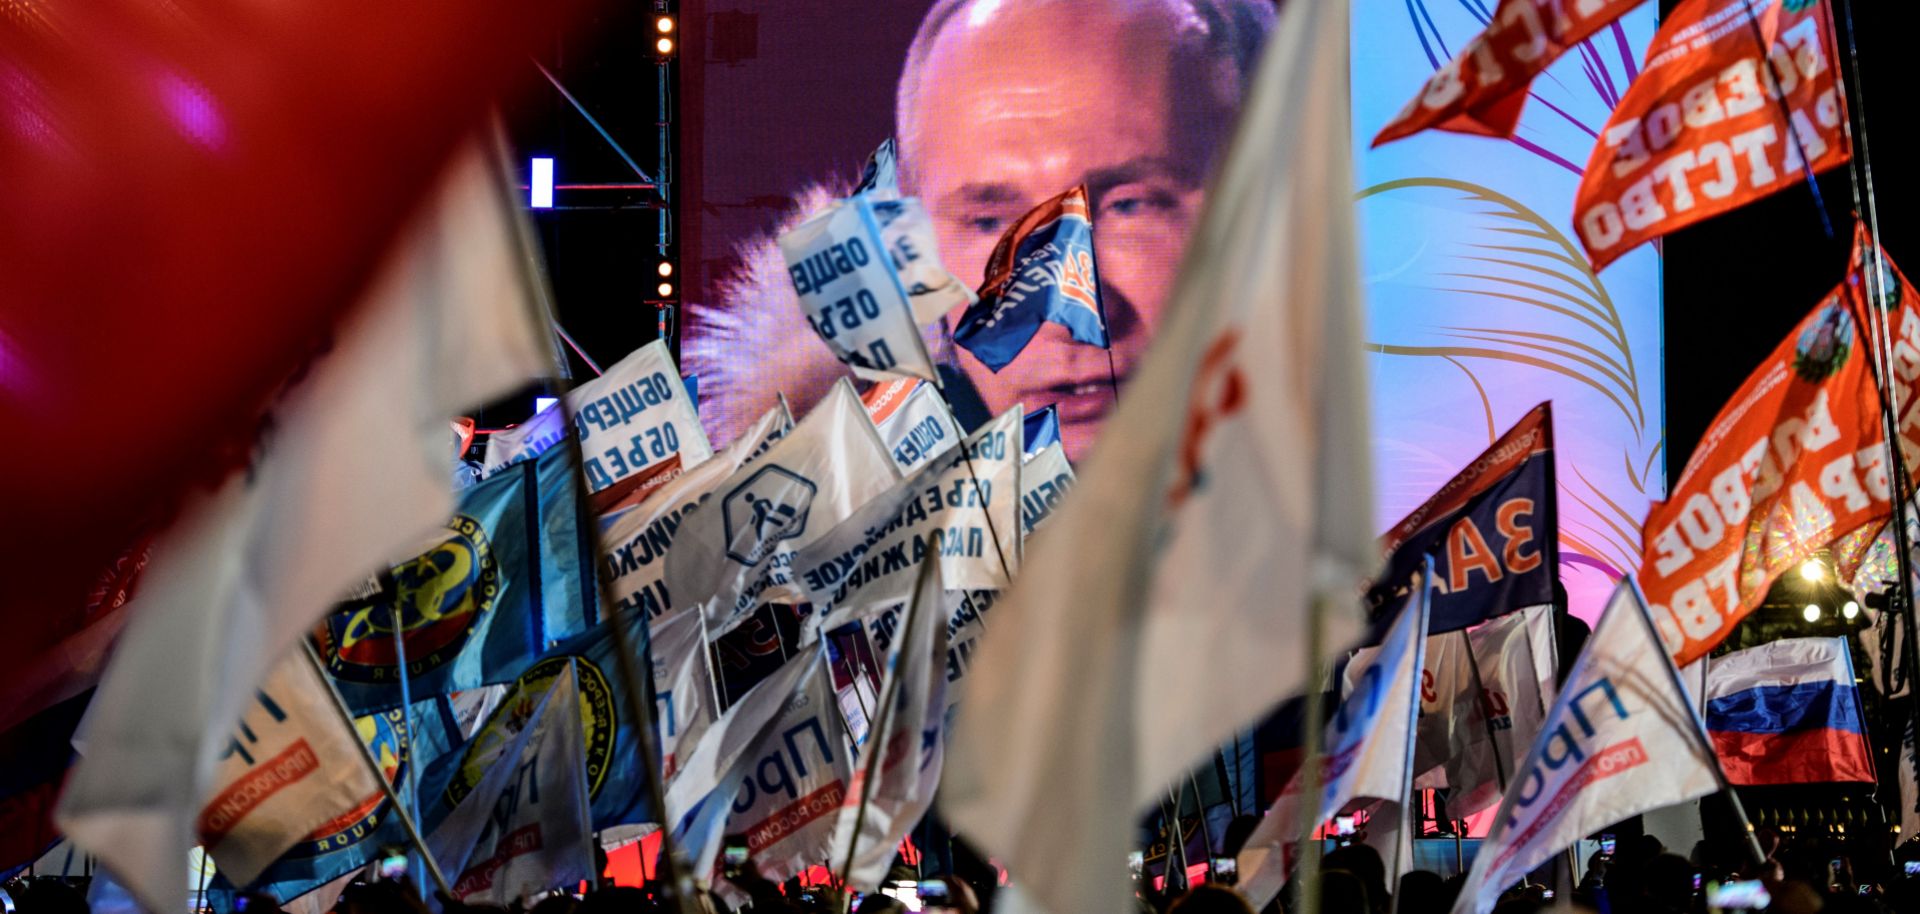 Russian President Vladimir Putin gives a speech at a rally March 18 to commemorate the fourth anniversary of his country's annexation of Crimea.